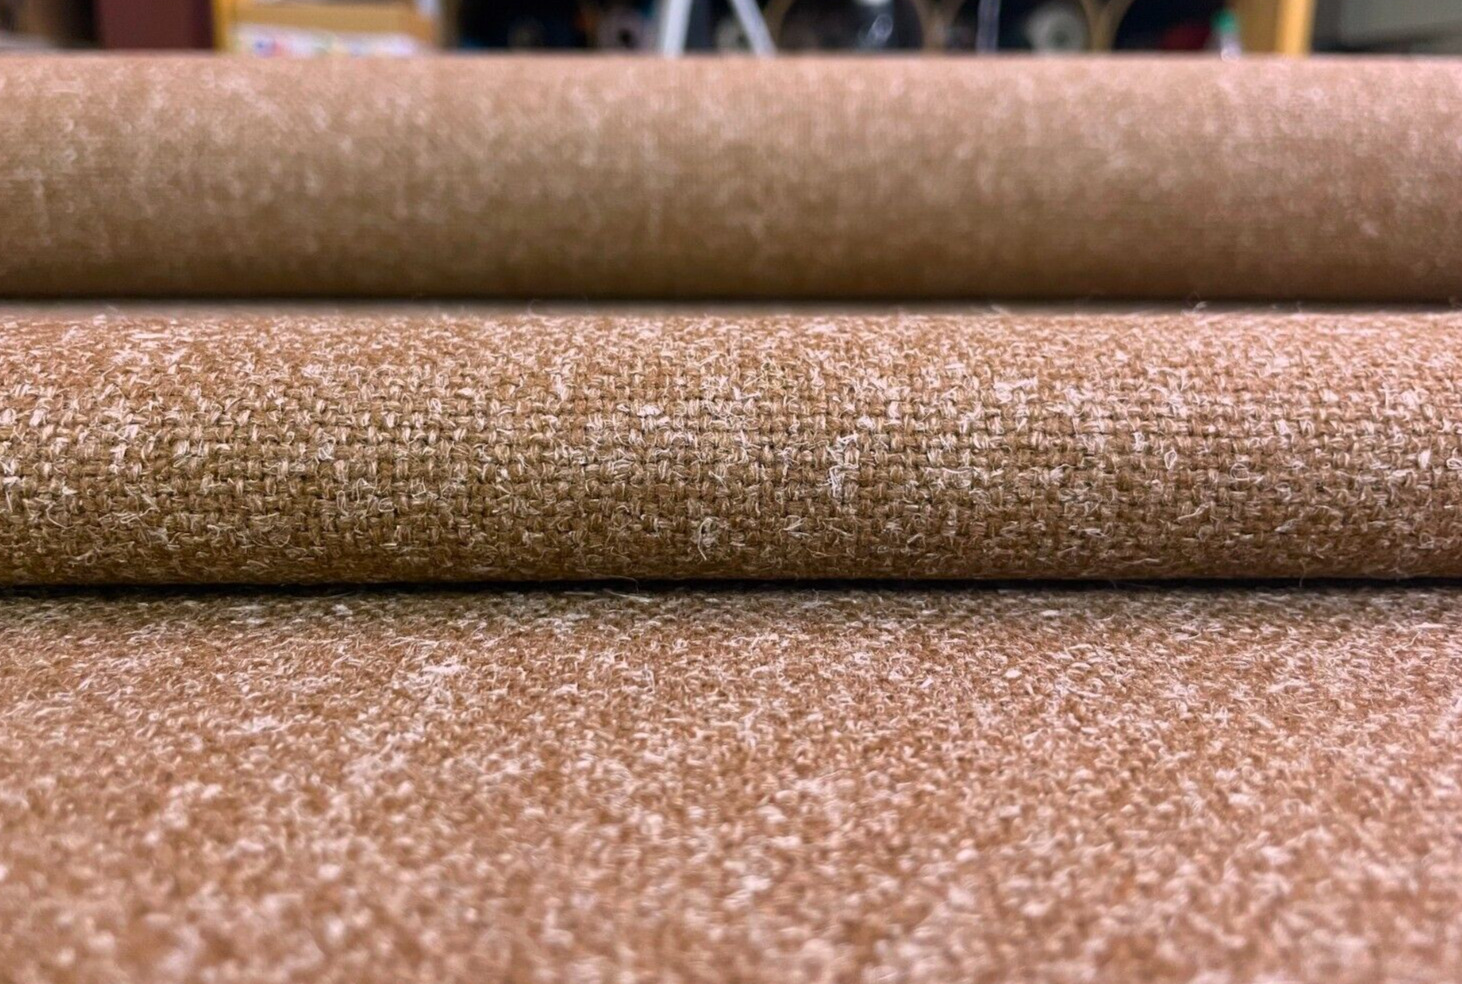 1.875 yds Camira Hemp Seed Tawny Brown Woven Wool Upholstery Fabric MSRP $110